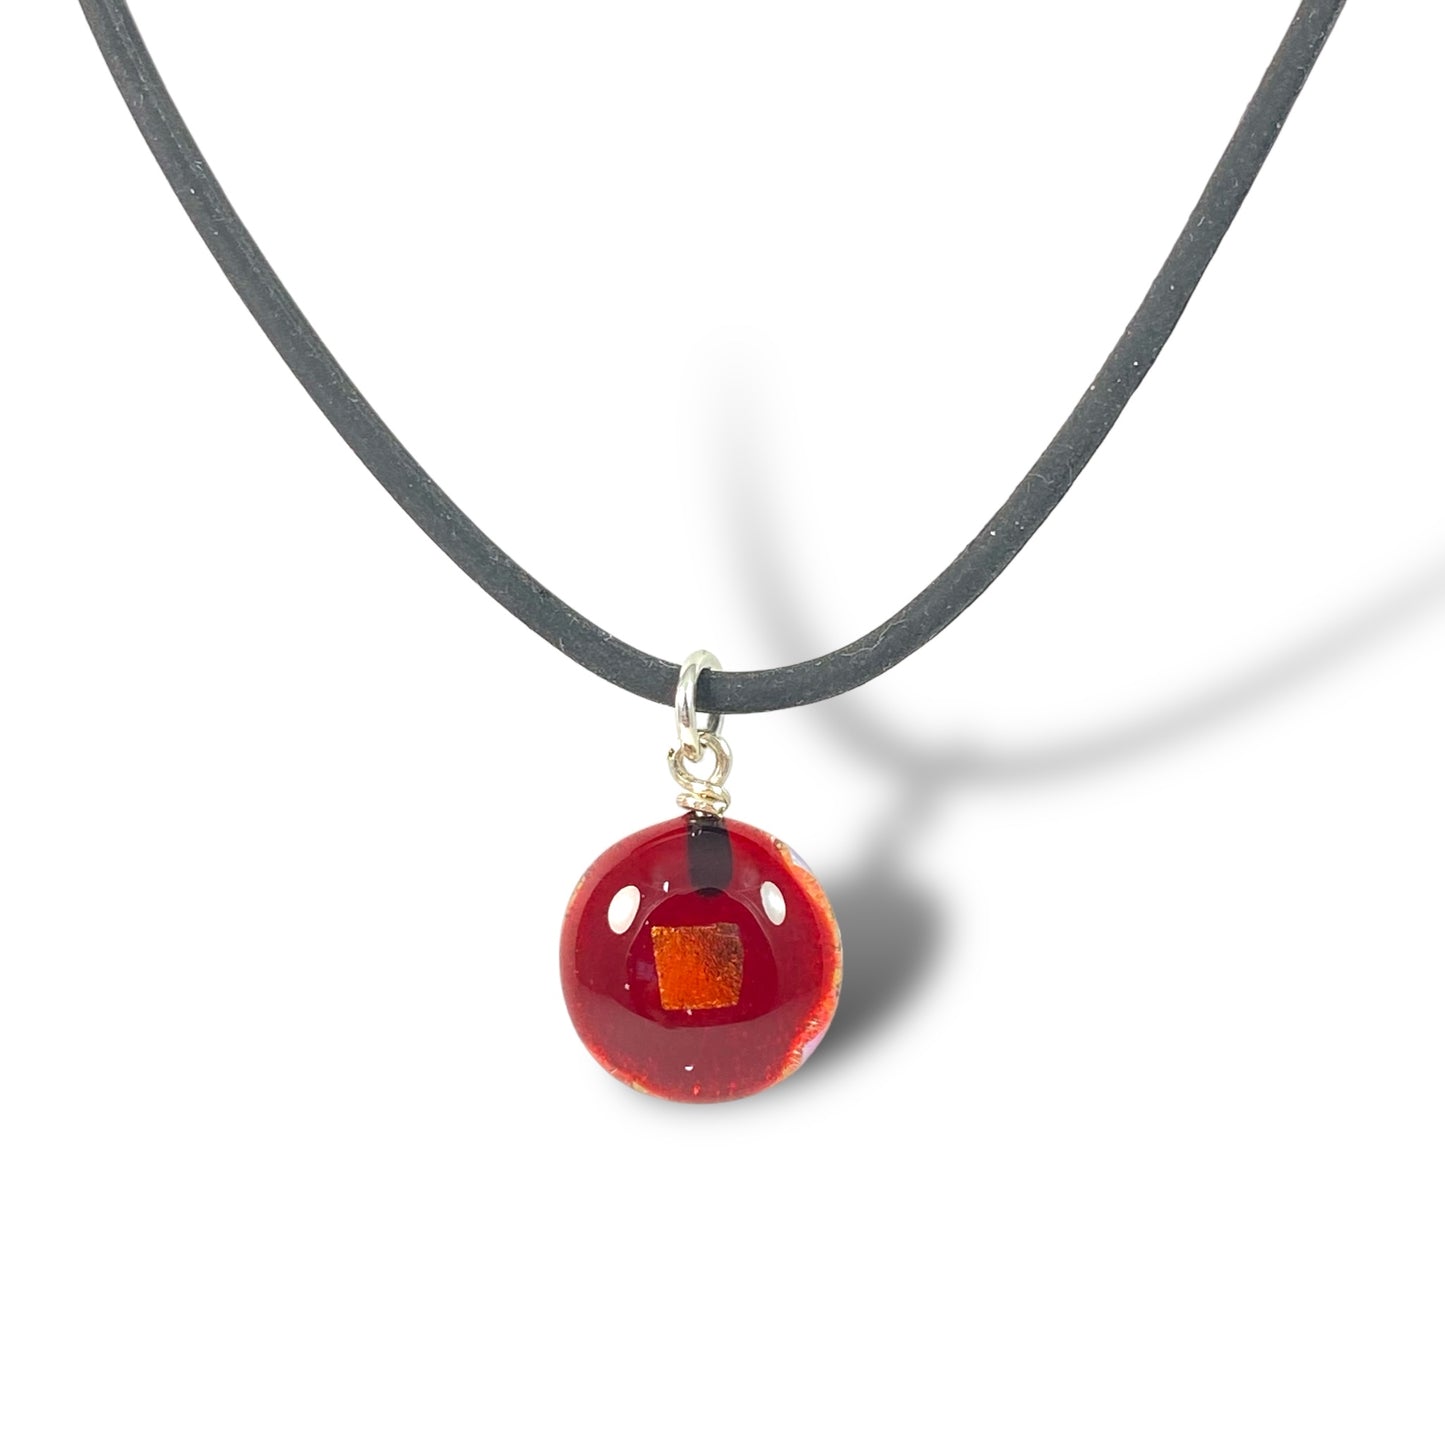 Space Ball Necklace in Cherry Red